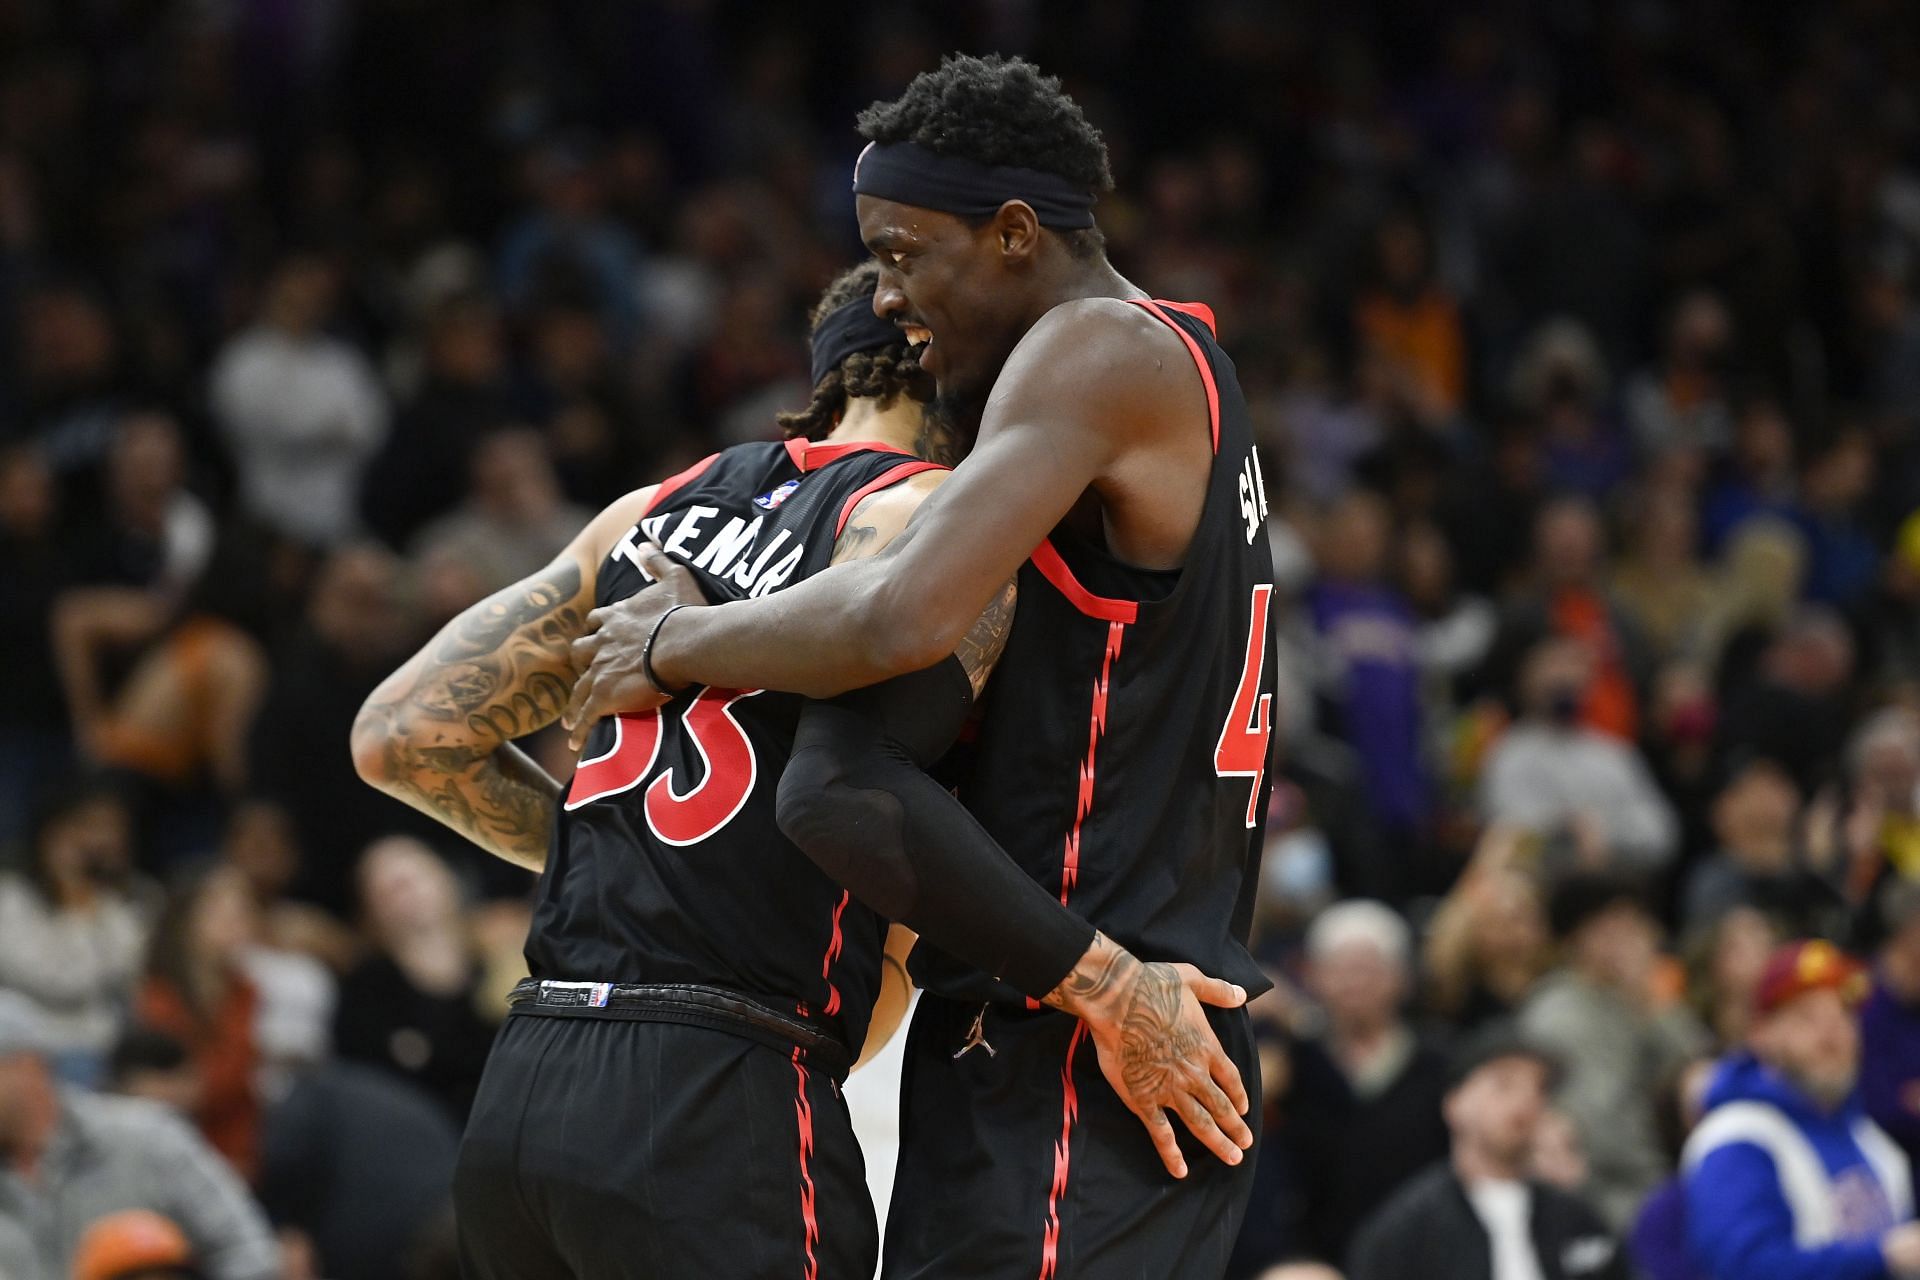 Gary Trent Jr. and Pascal Siakam of the Raptors celebrate